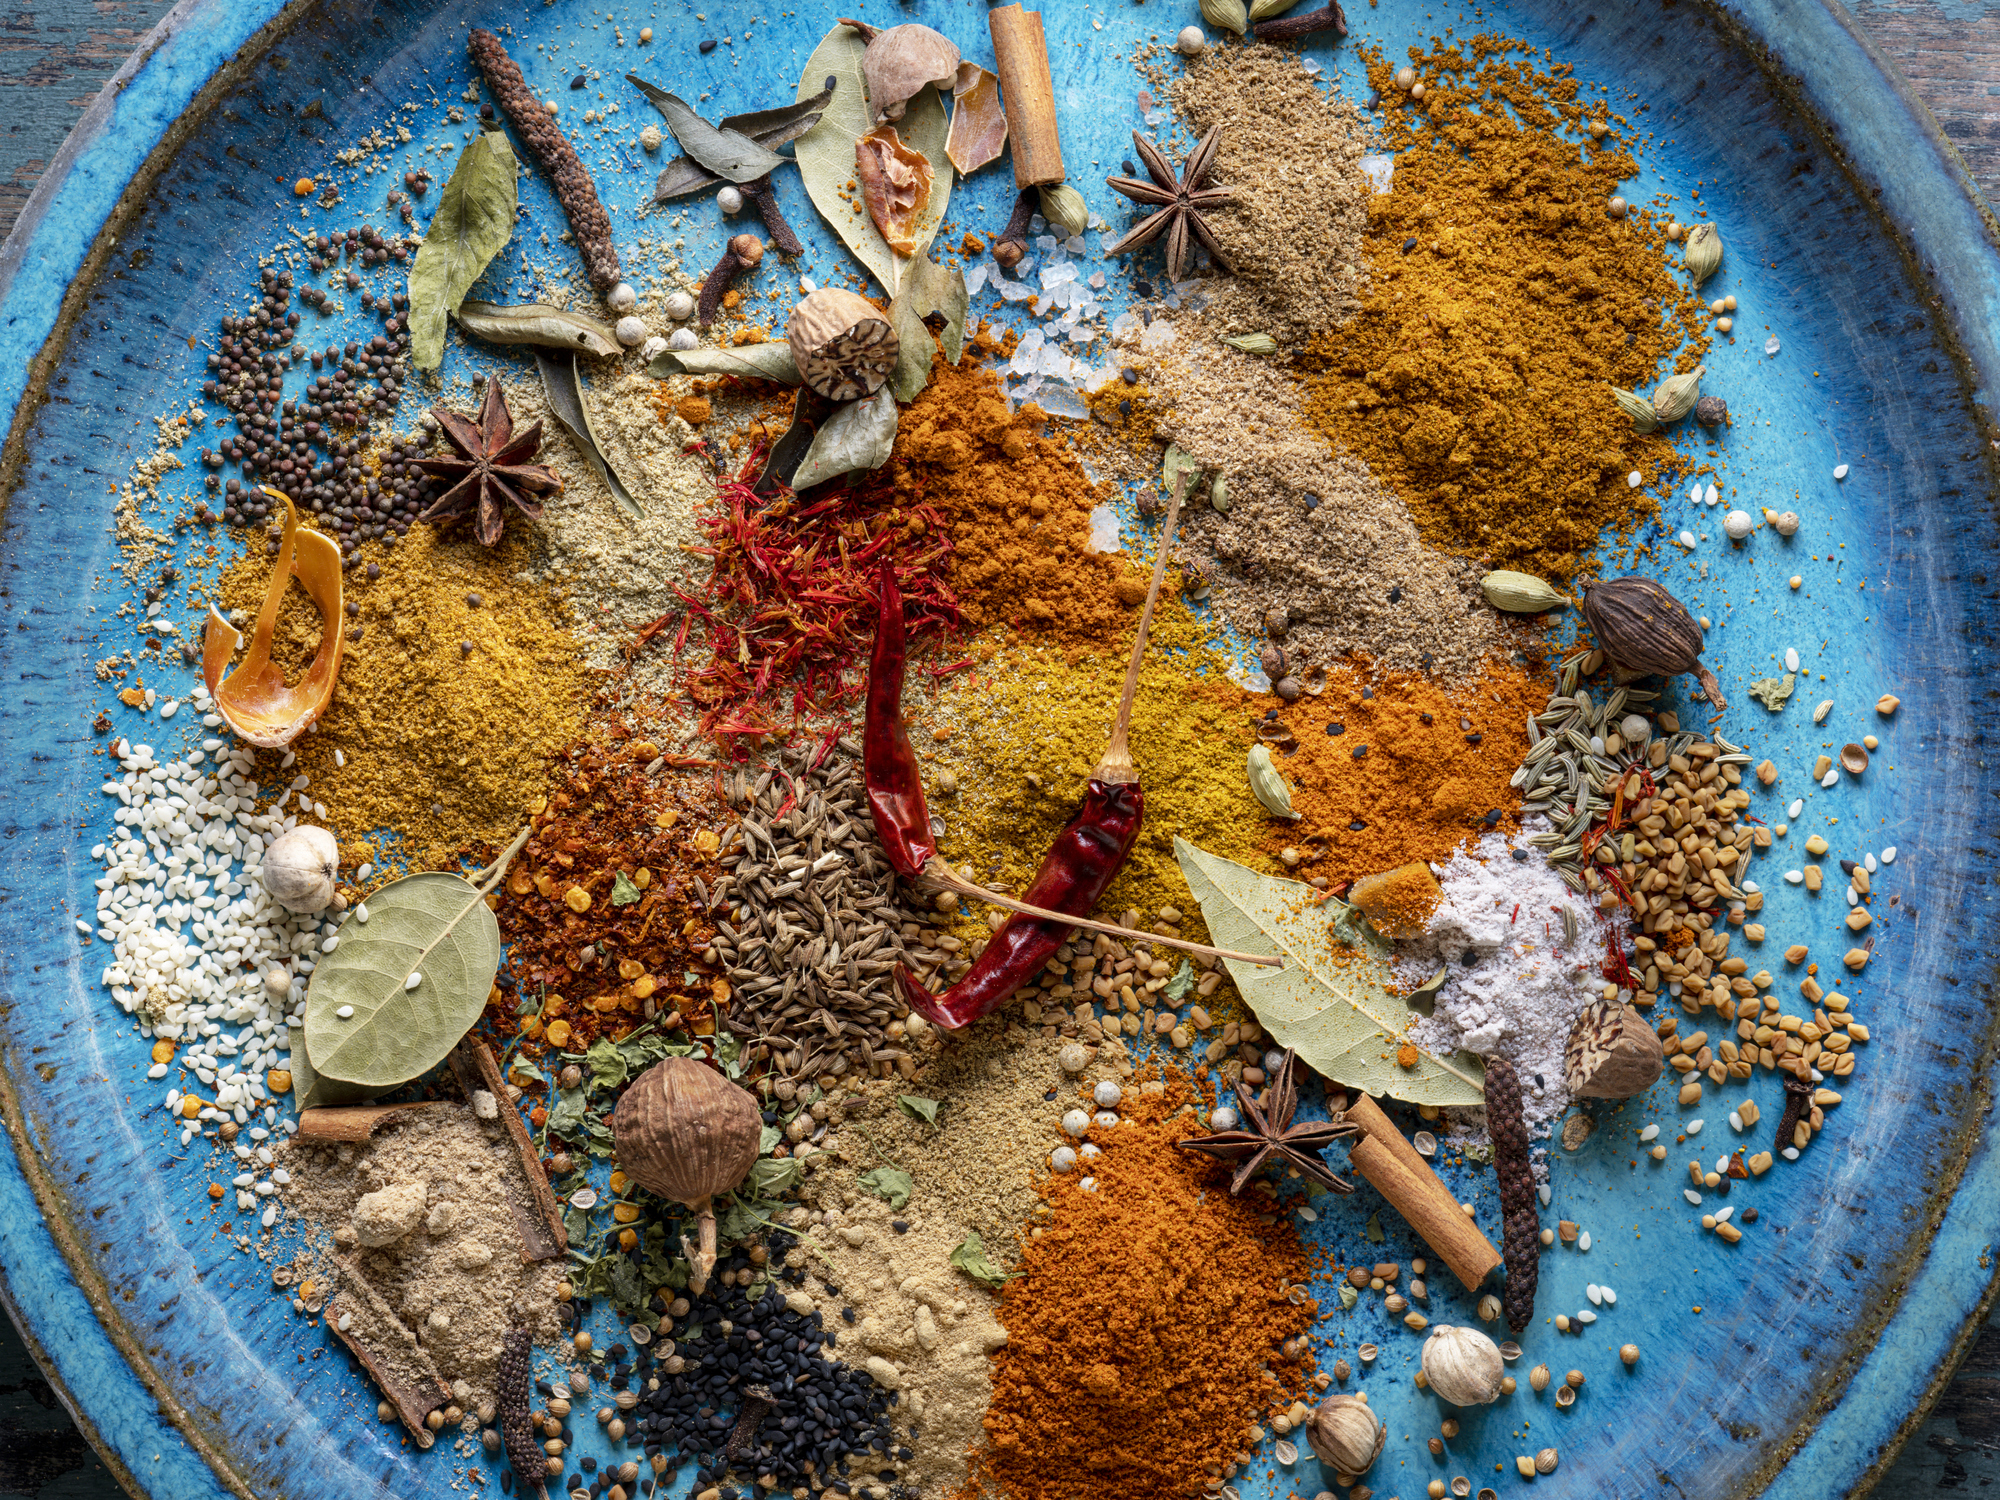 Indian food is not a spice monolith. We break down the cuisine’s most common misconceptions.